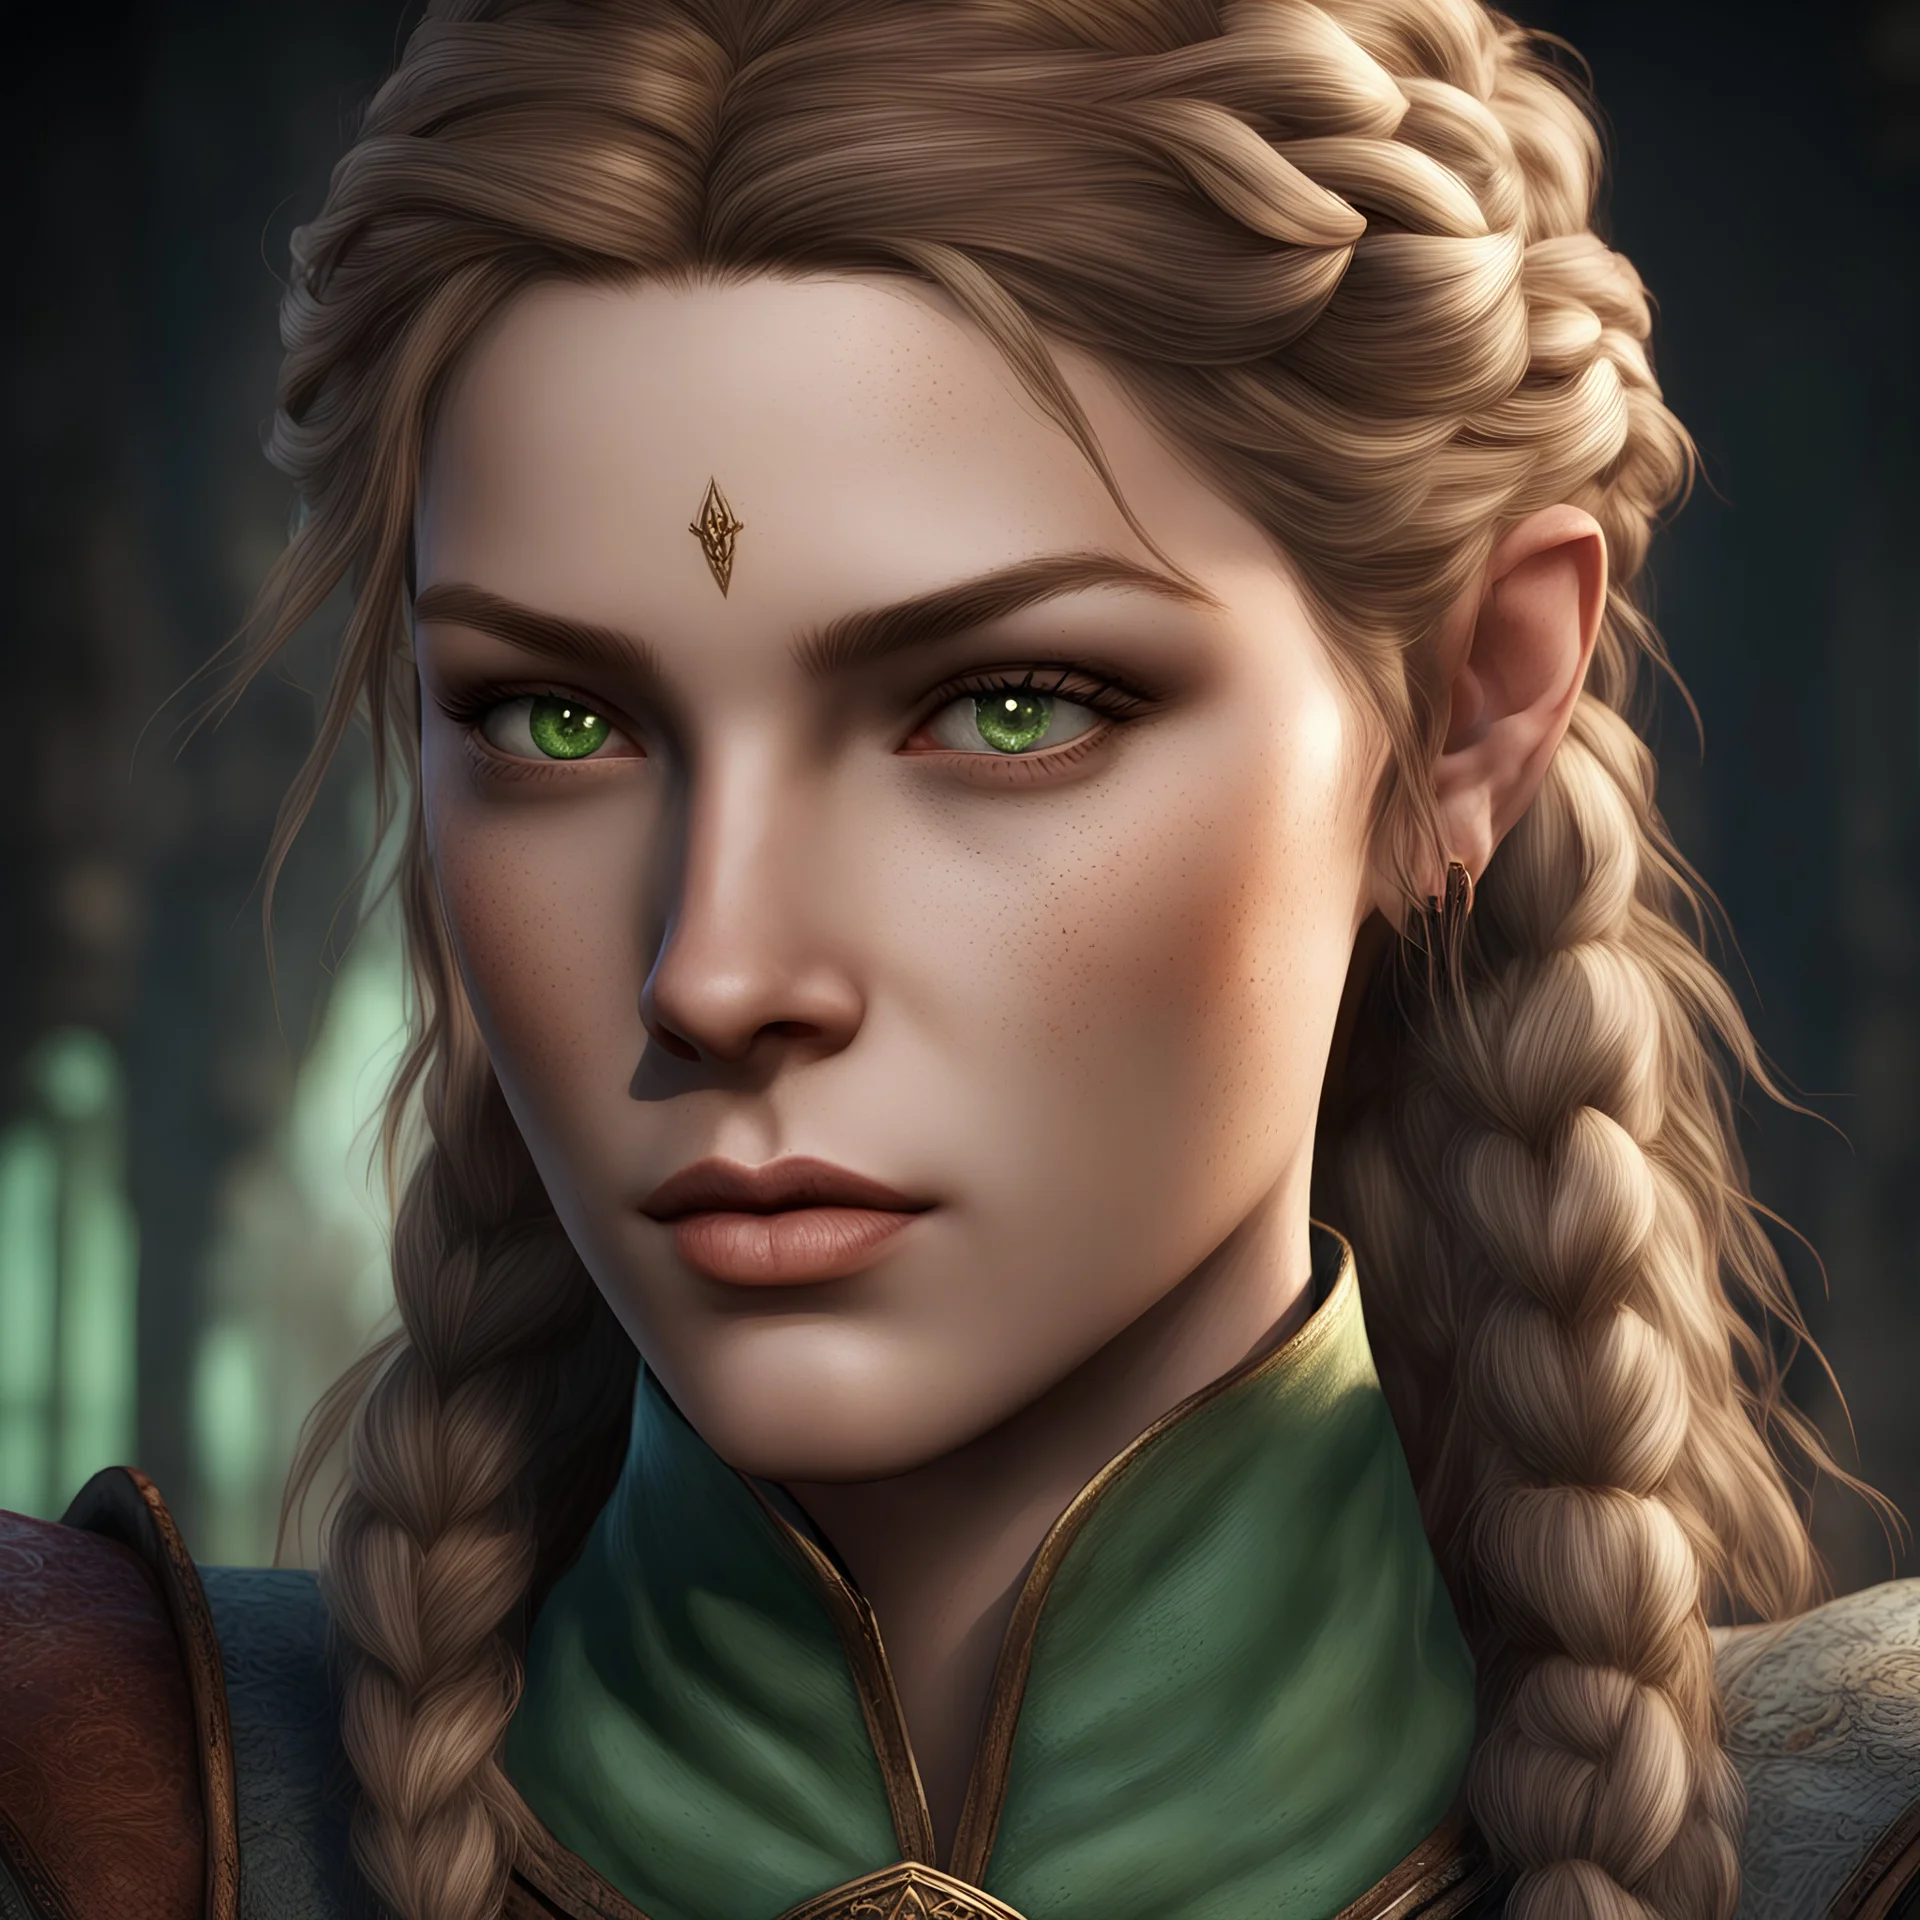 face portrait of a baldur's gate 3 female character. she has a beautiful face. she has a youthful face. she has a small, plump mouth. she has long, wavy, light brown hair. she is a sorcerer. she is human. she has light green eyes. she has some freckles. she has some braids in her hair in a half updo. she has a round face.